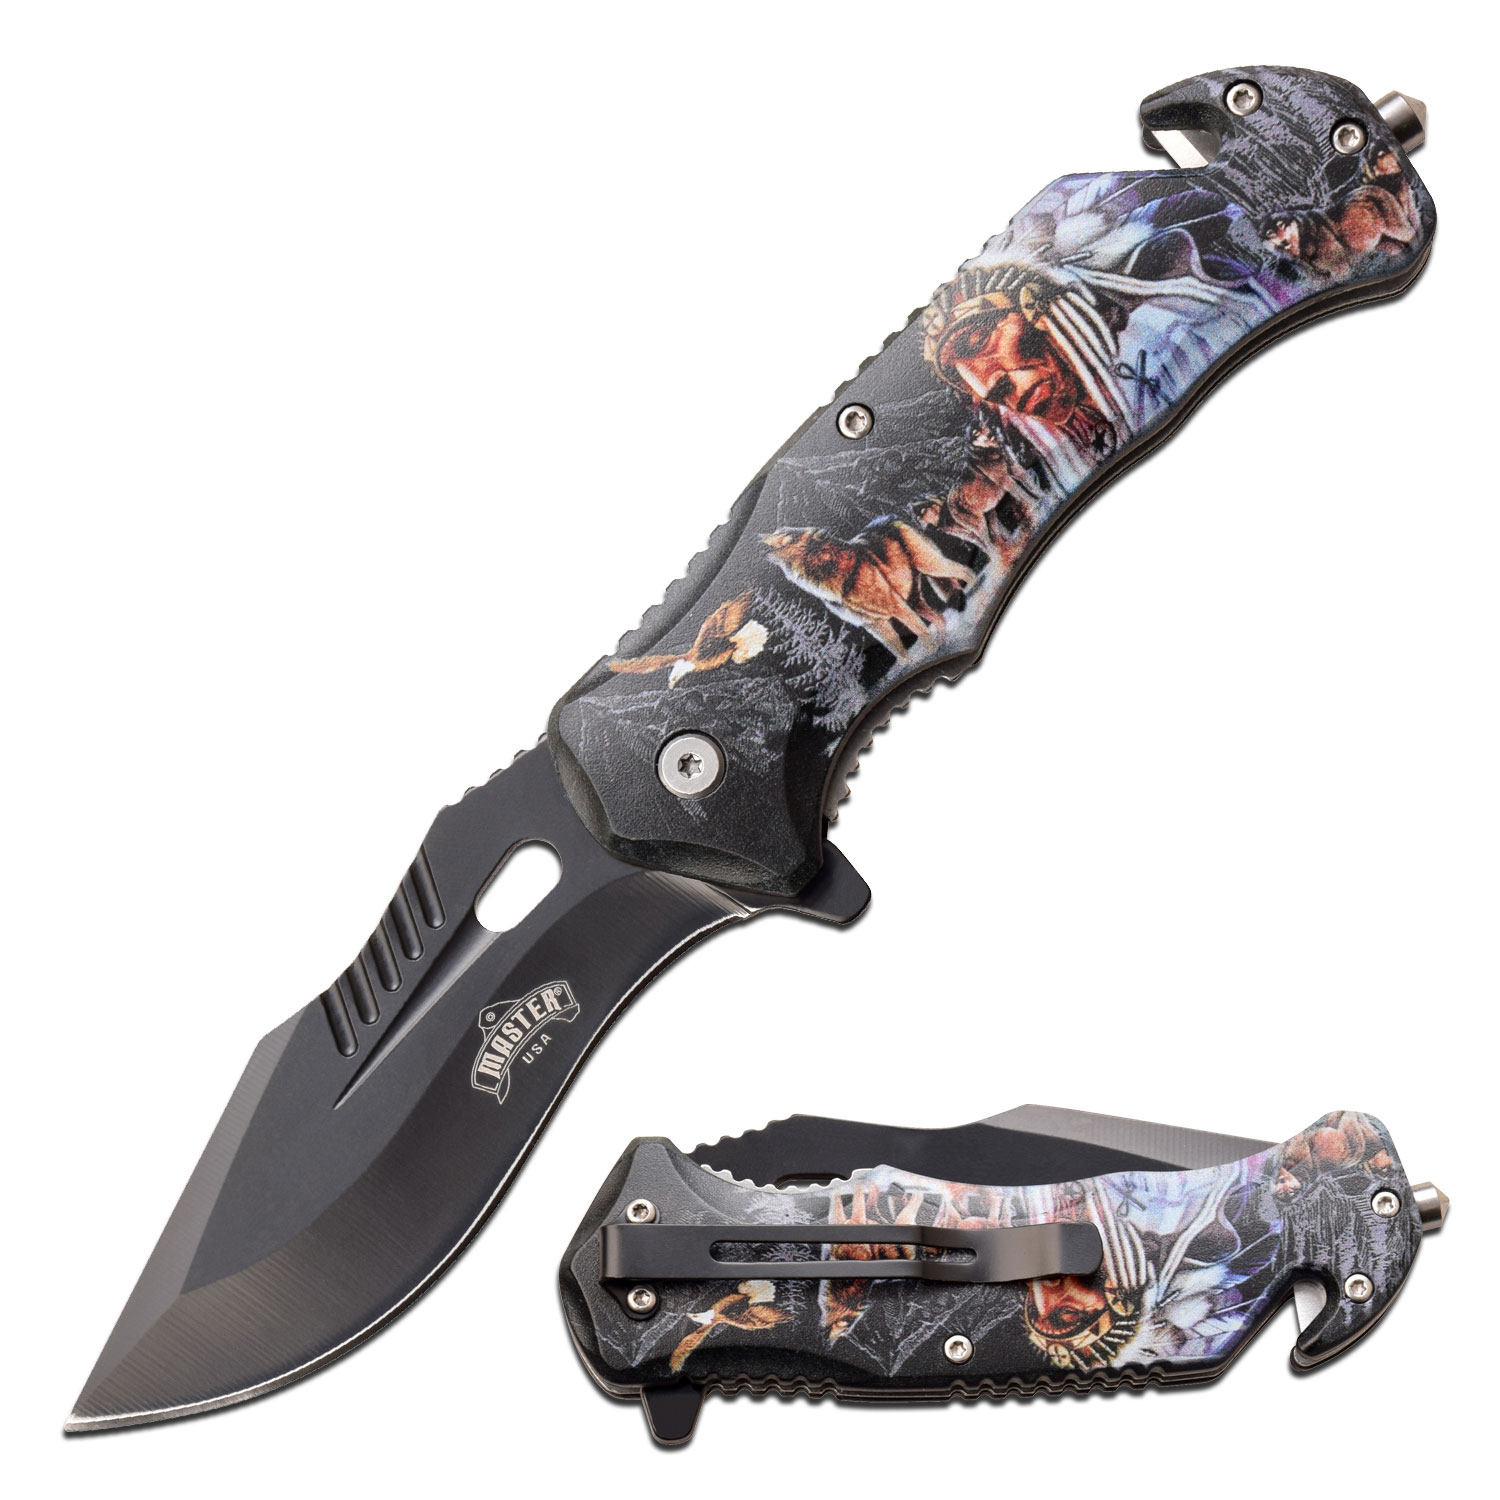 Spring-Assist Folding Knife Black 3.75In Blade Native American Chief Eagle Wolf